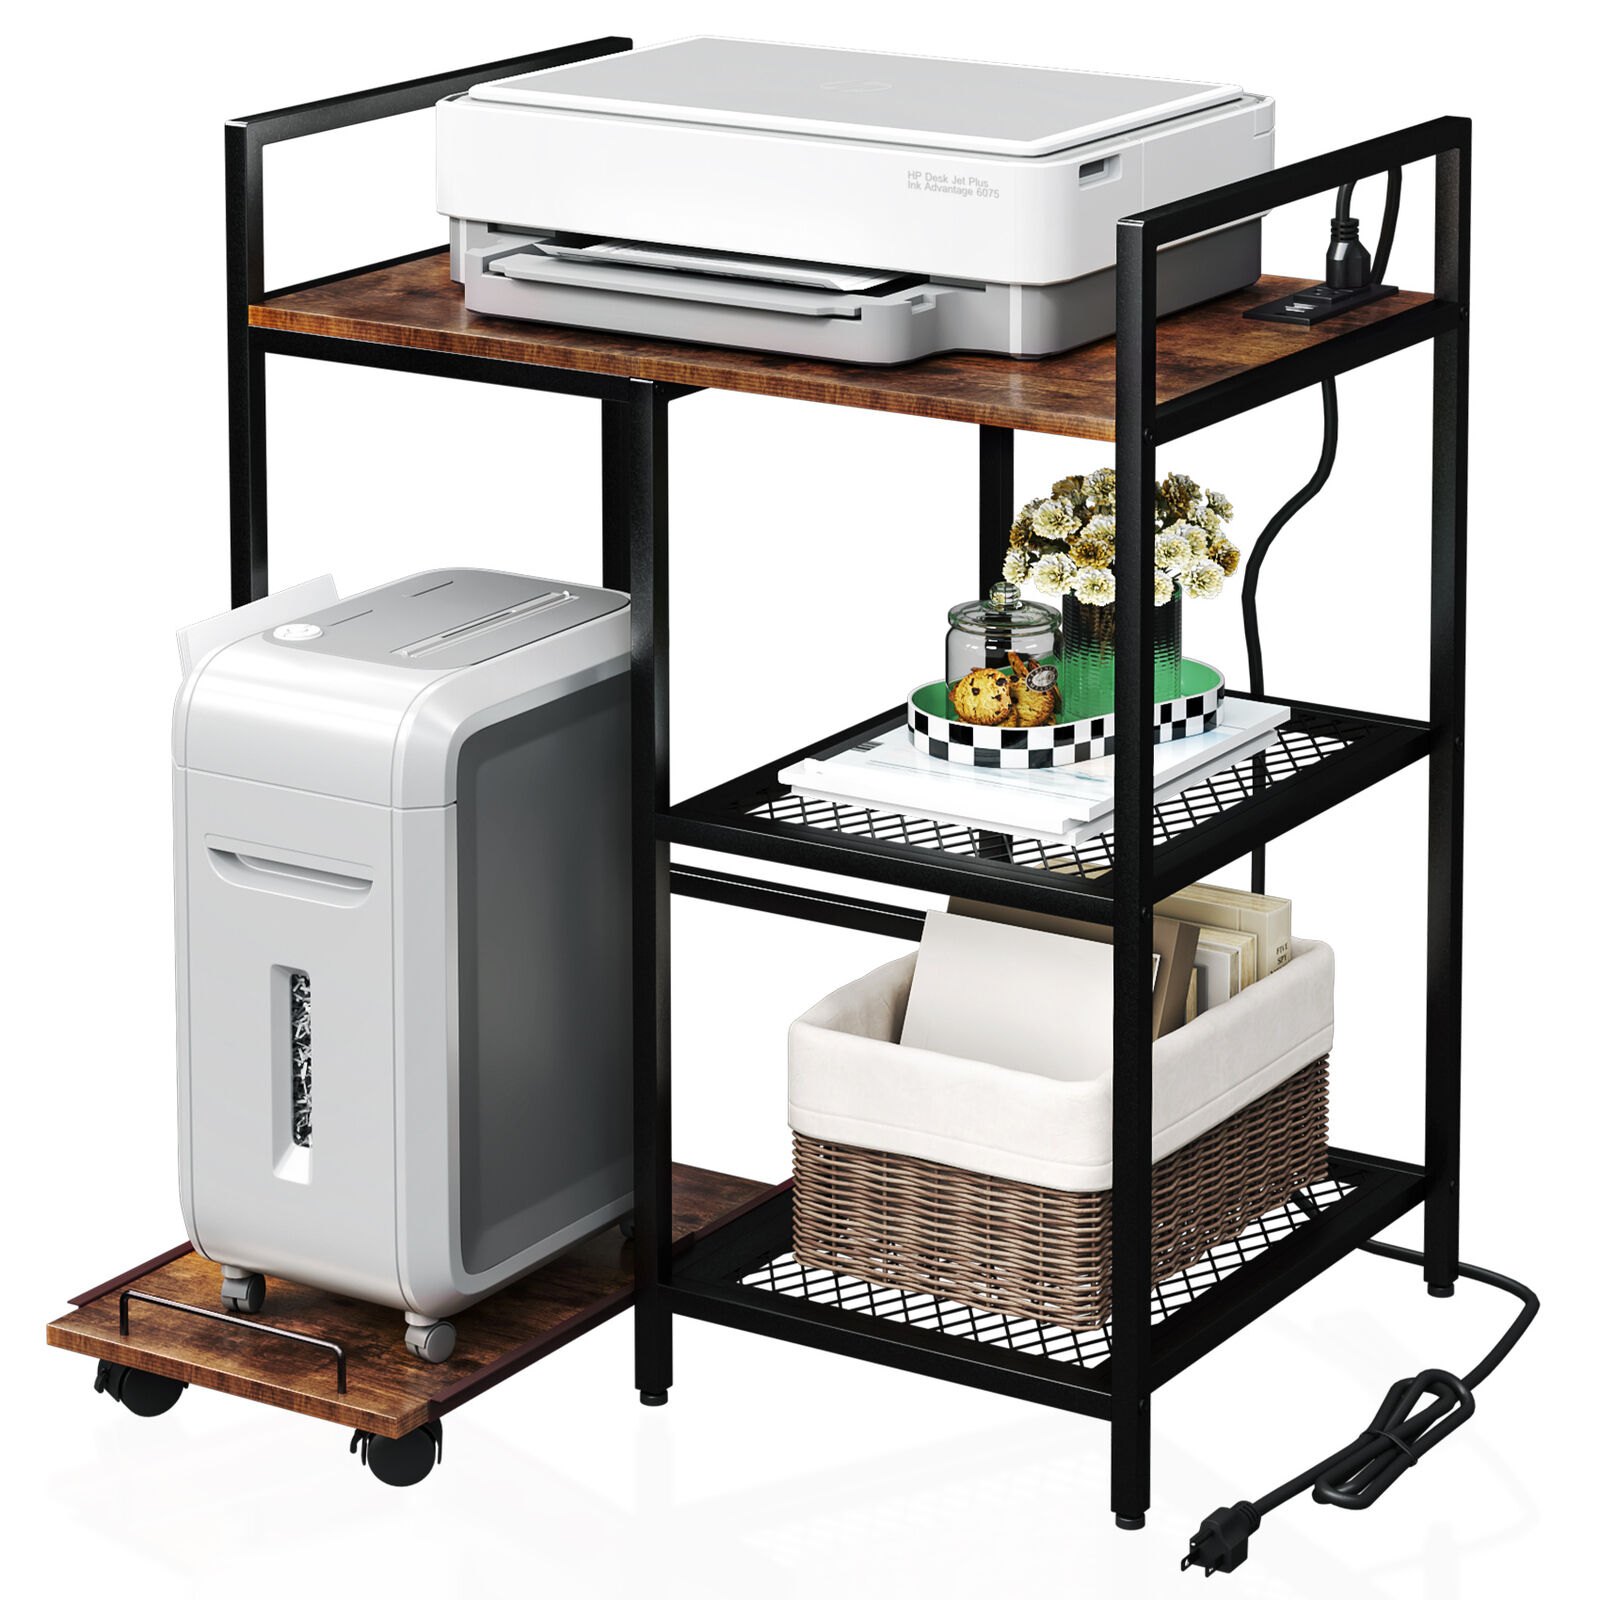 TC-HOMENY Printer Stand Cart with Charging Station Office Storage Rack Shelves